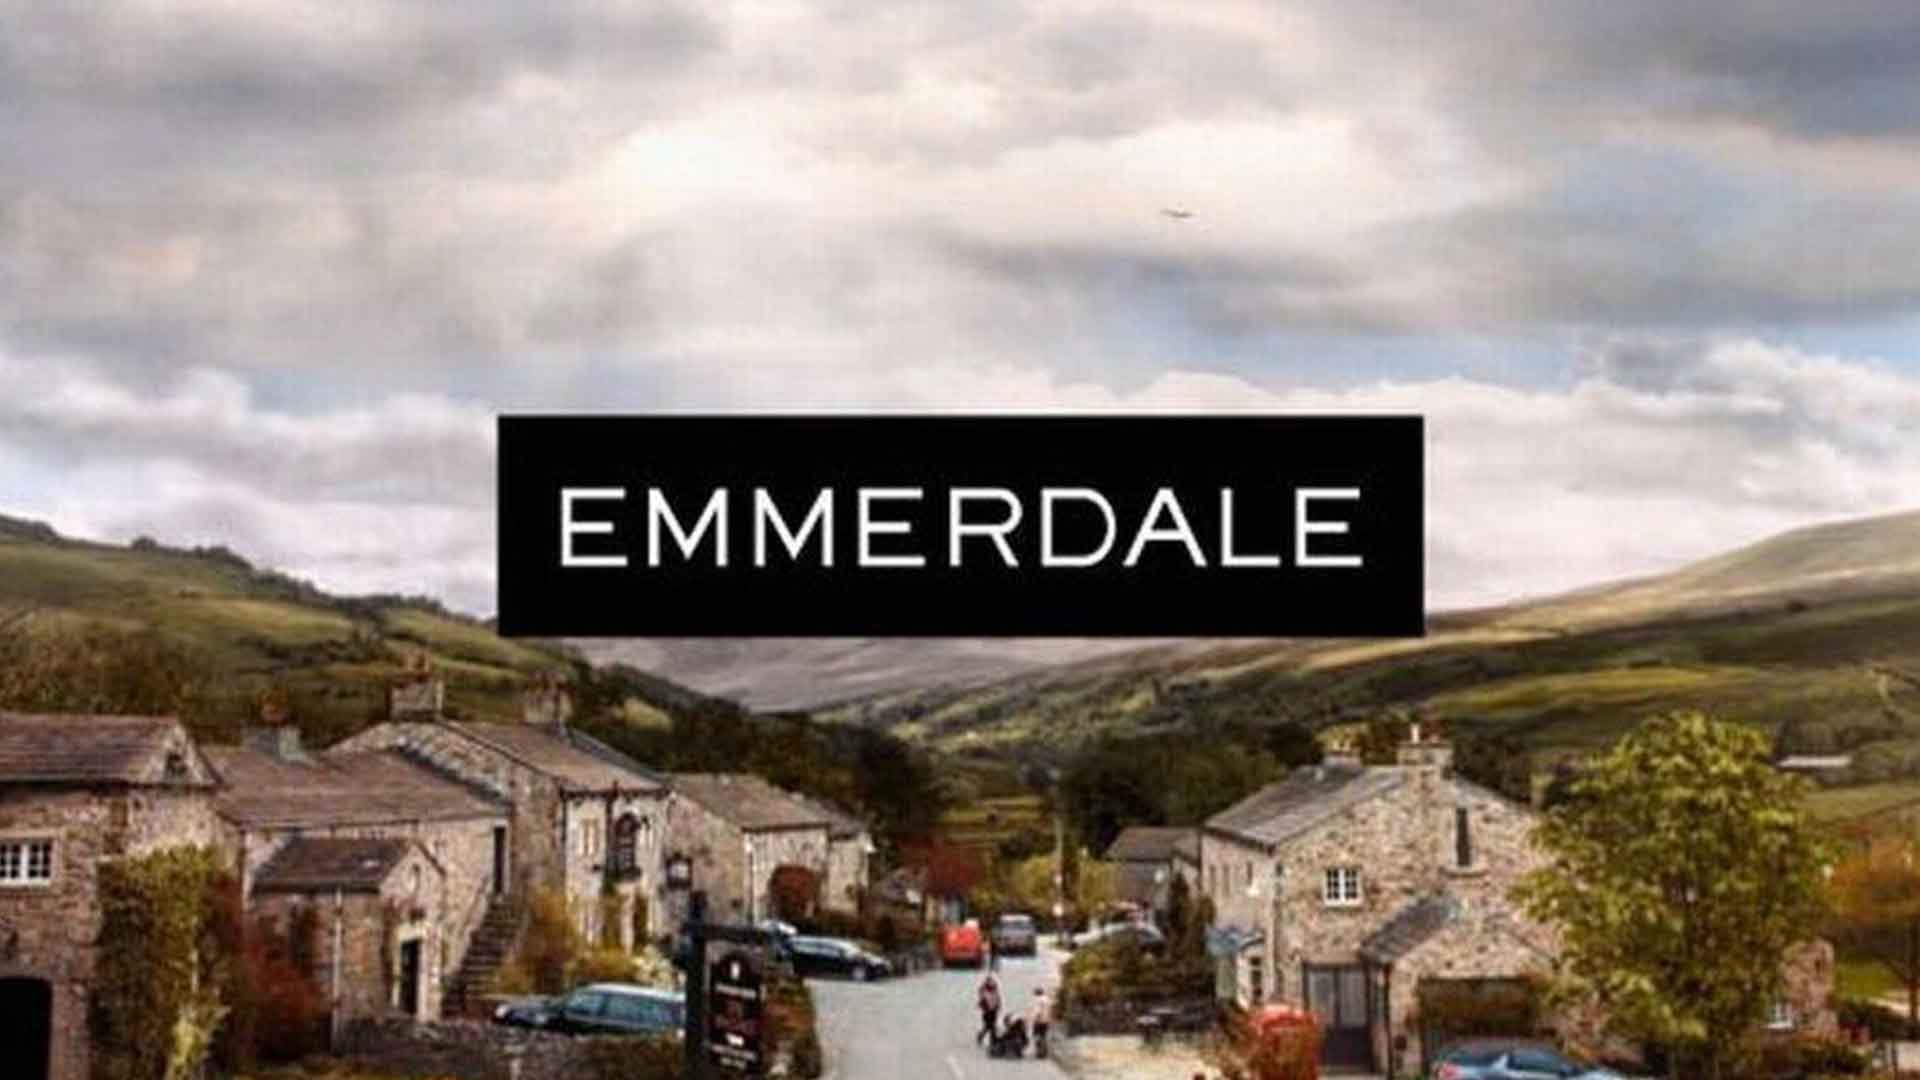 View of the city of Emmerdale in the main poster of the Emmerdale series